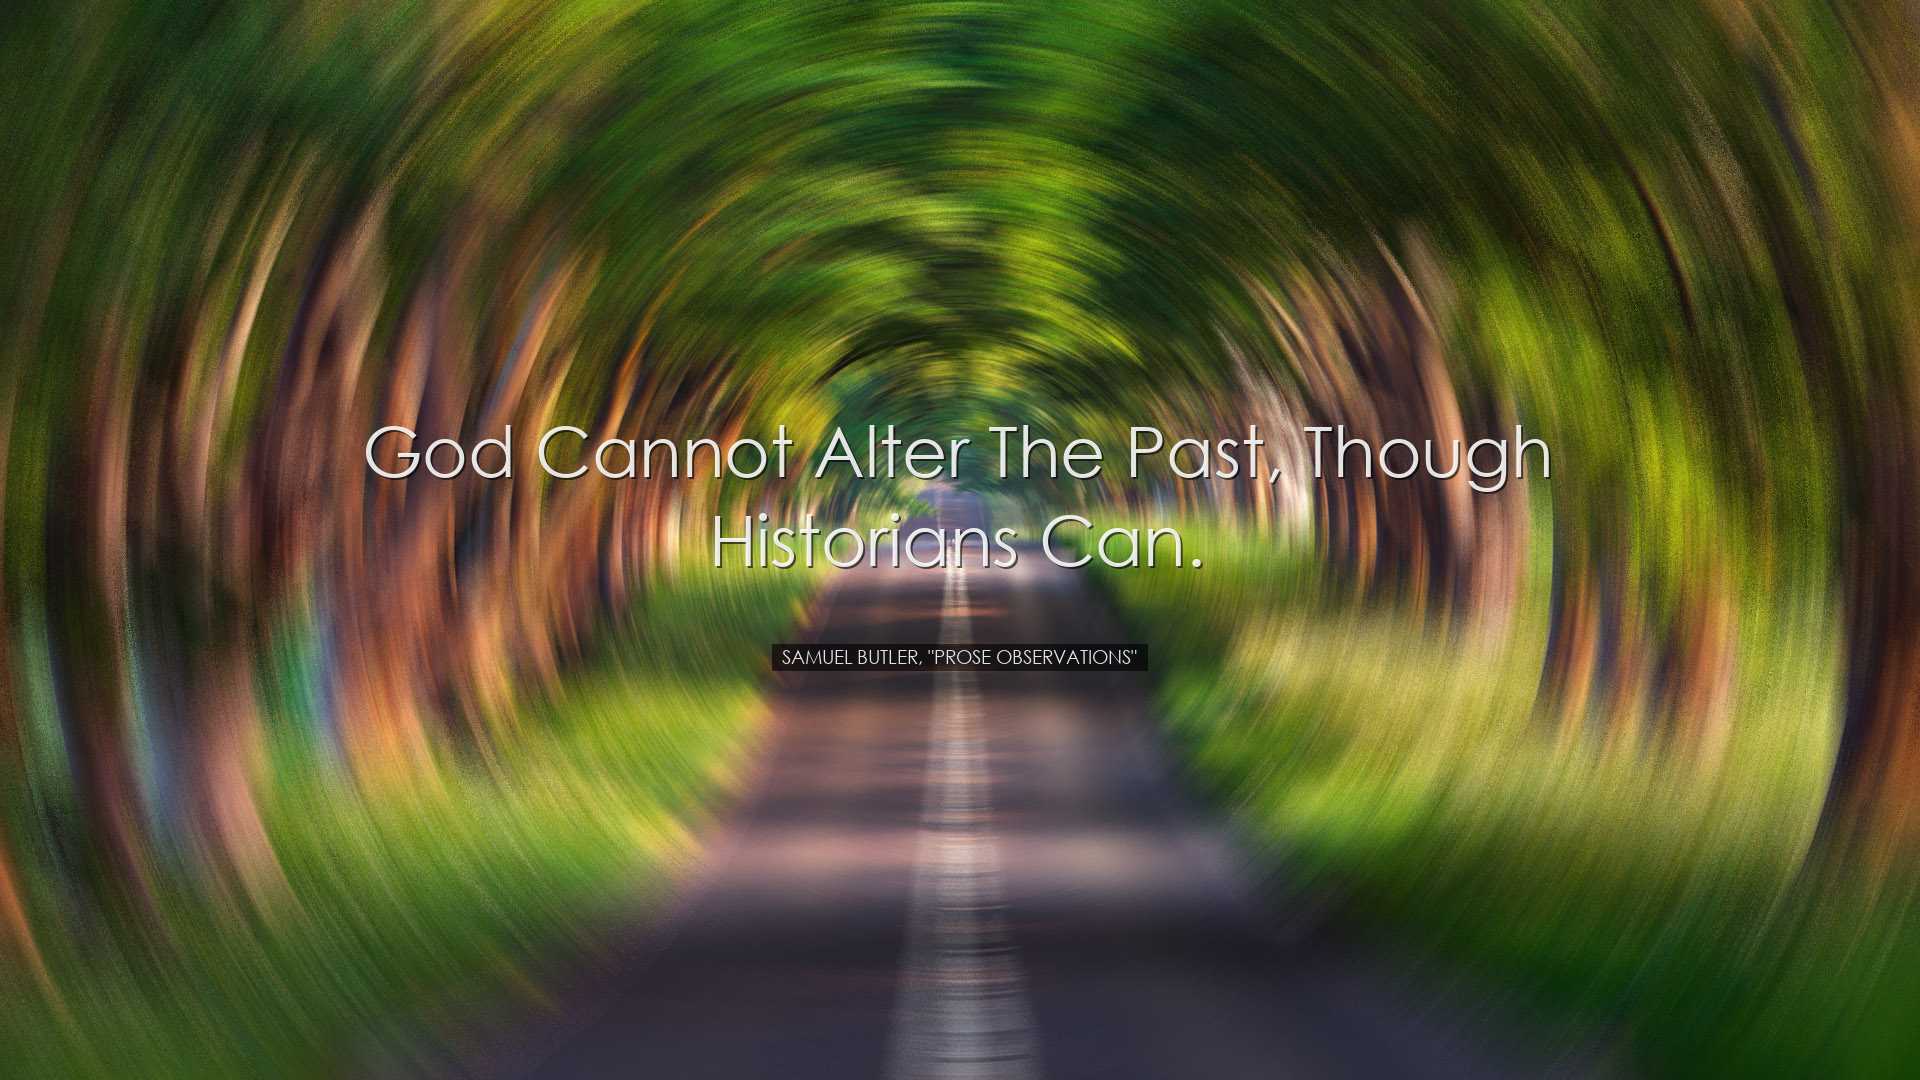 God cannot alter the past, though historians can. - Samuel Butler,